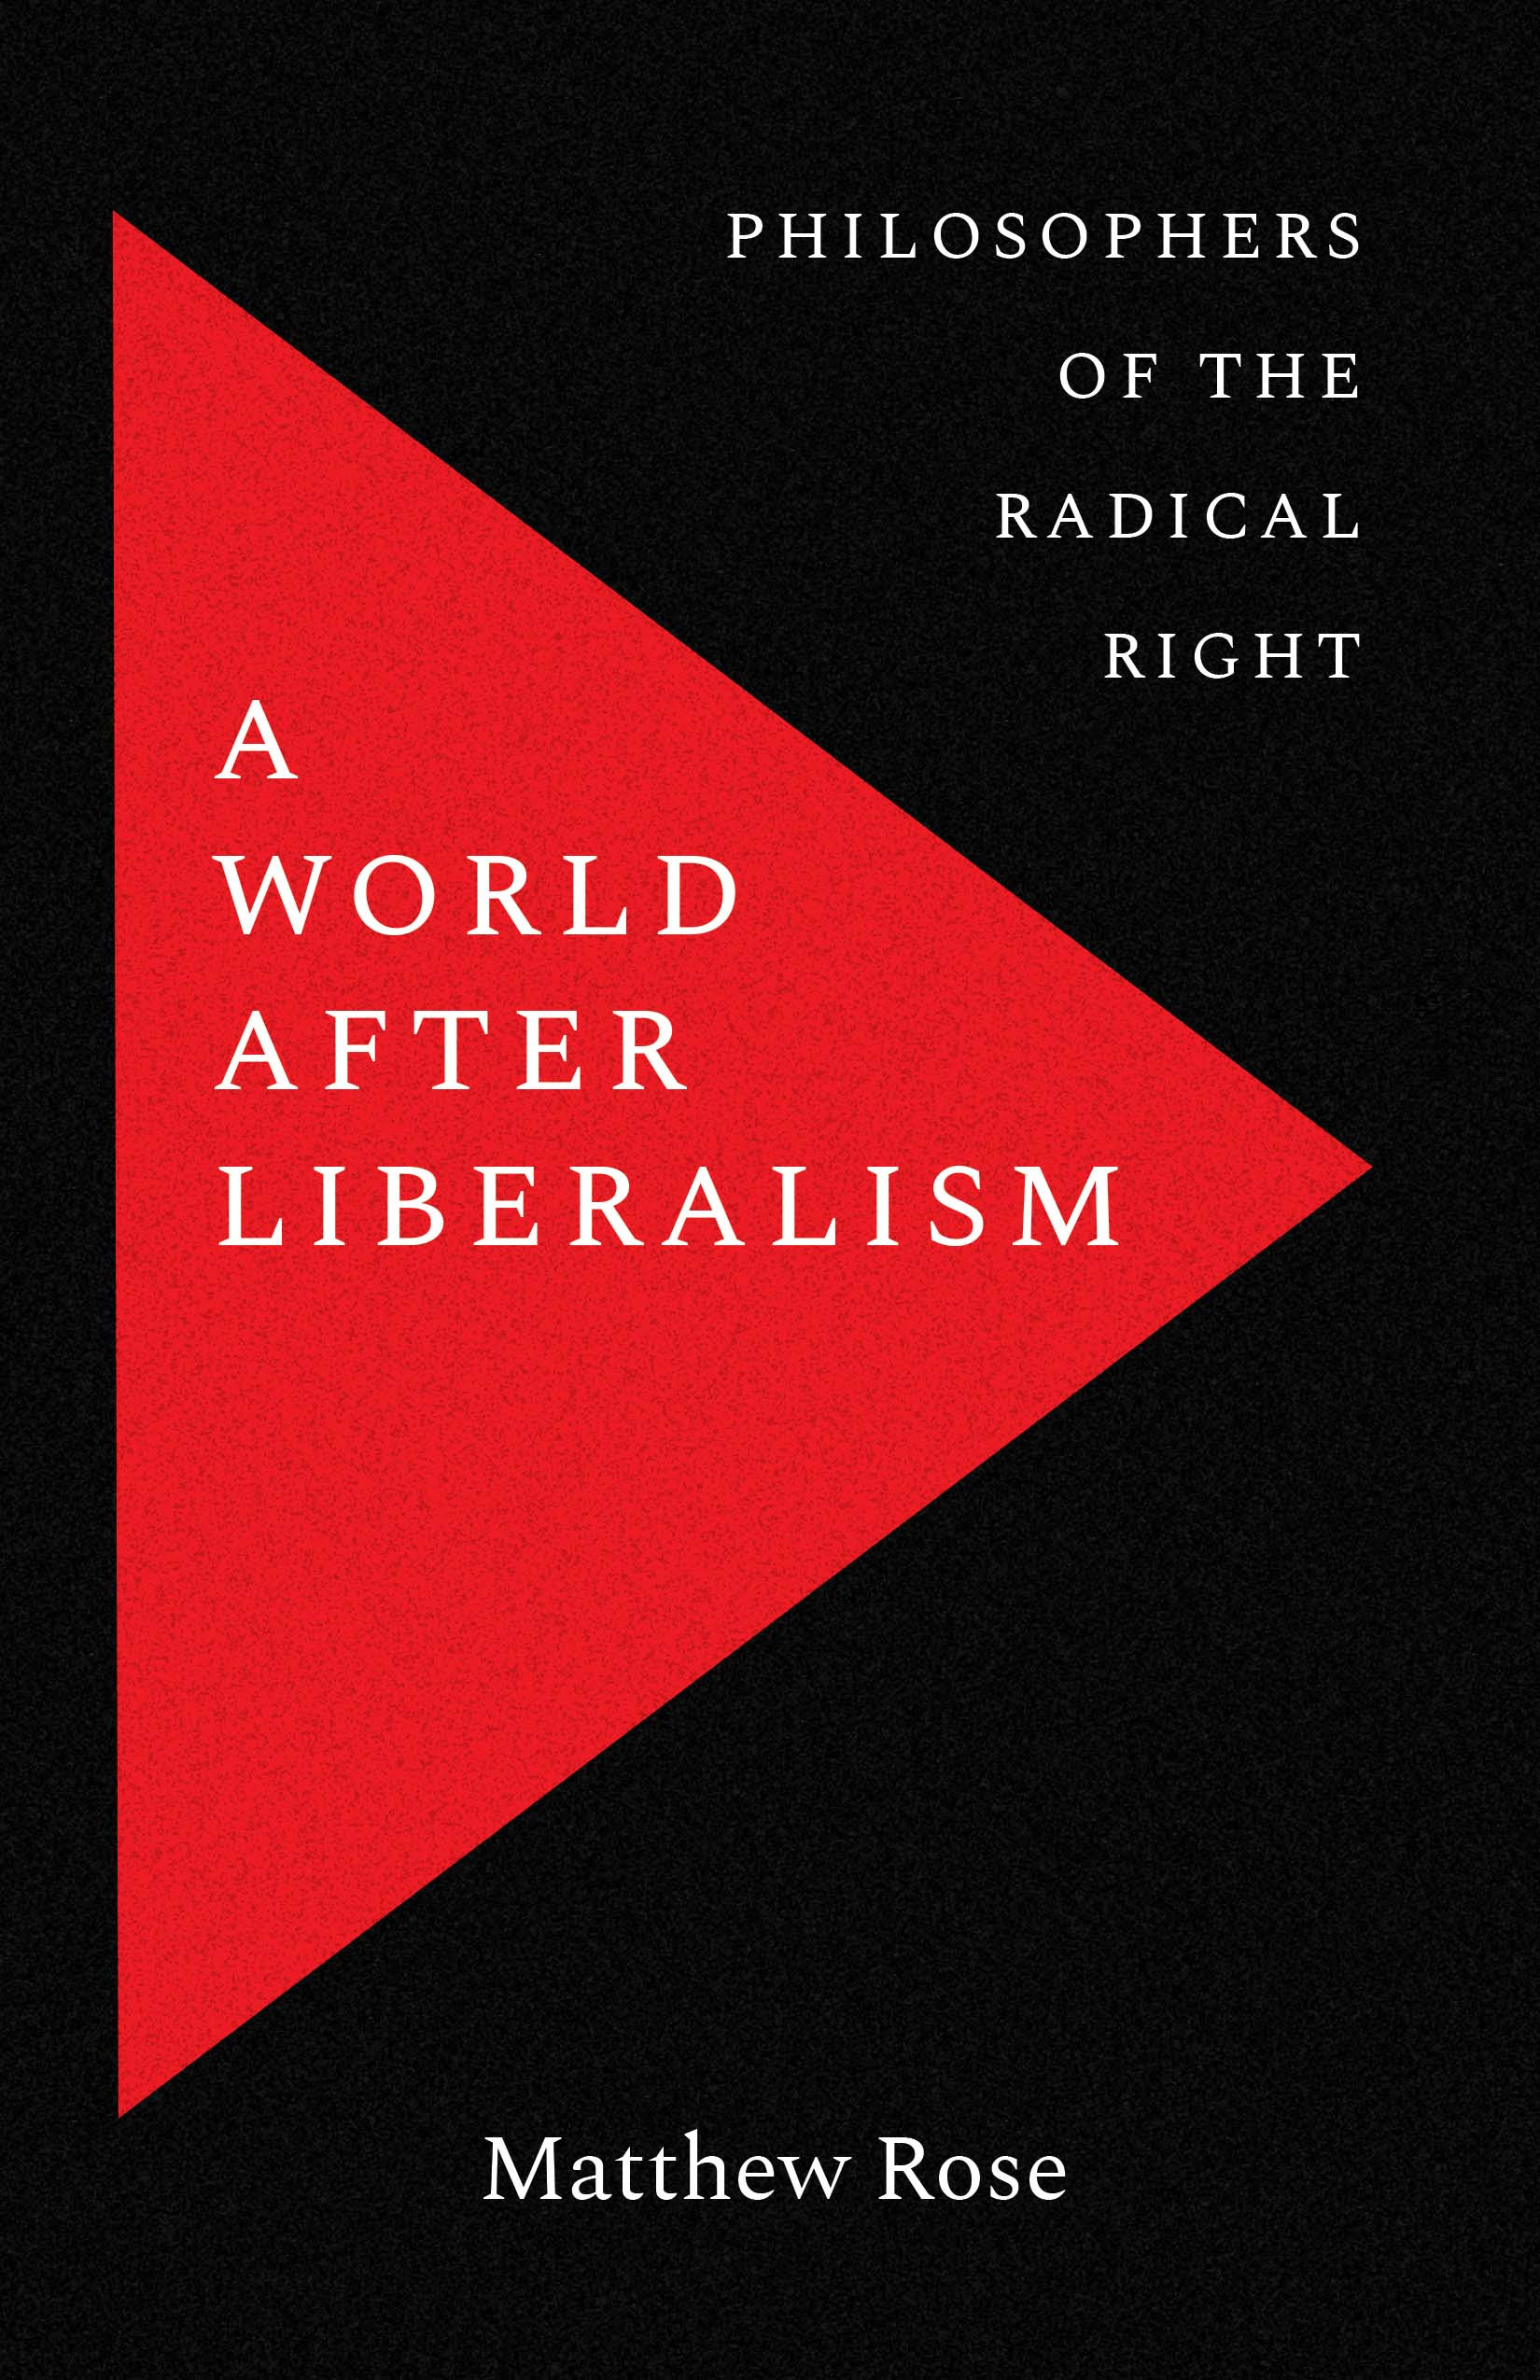 A World after Liberalism: Philosophers of the Radical Right PDF